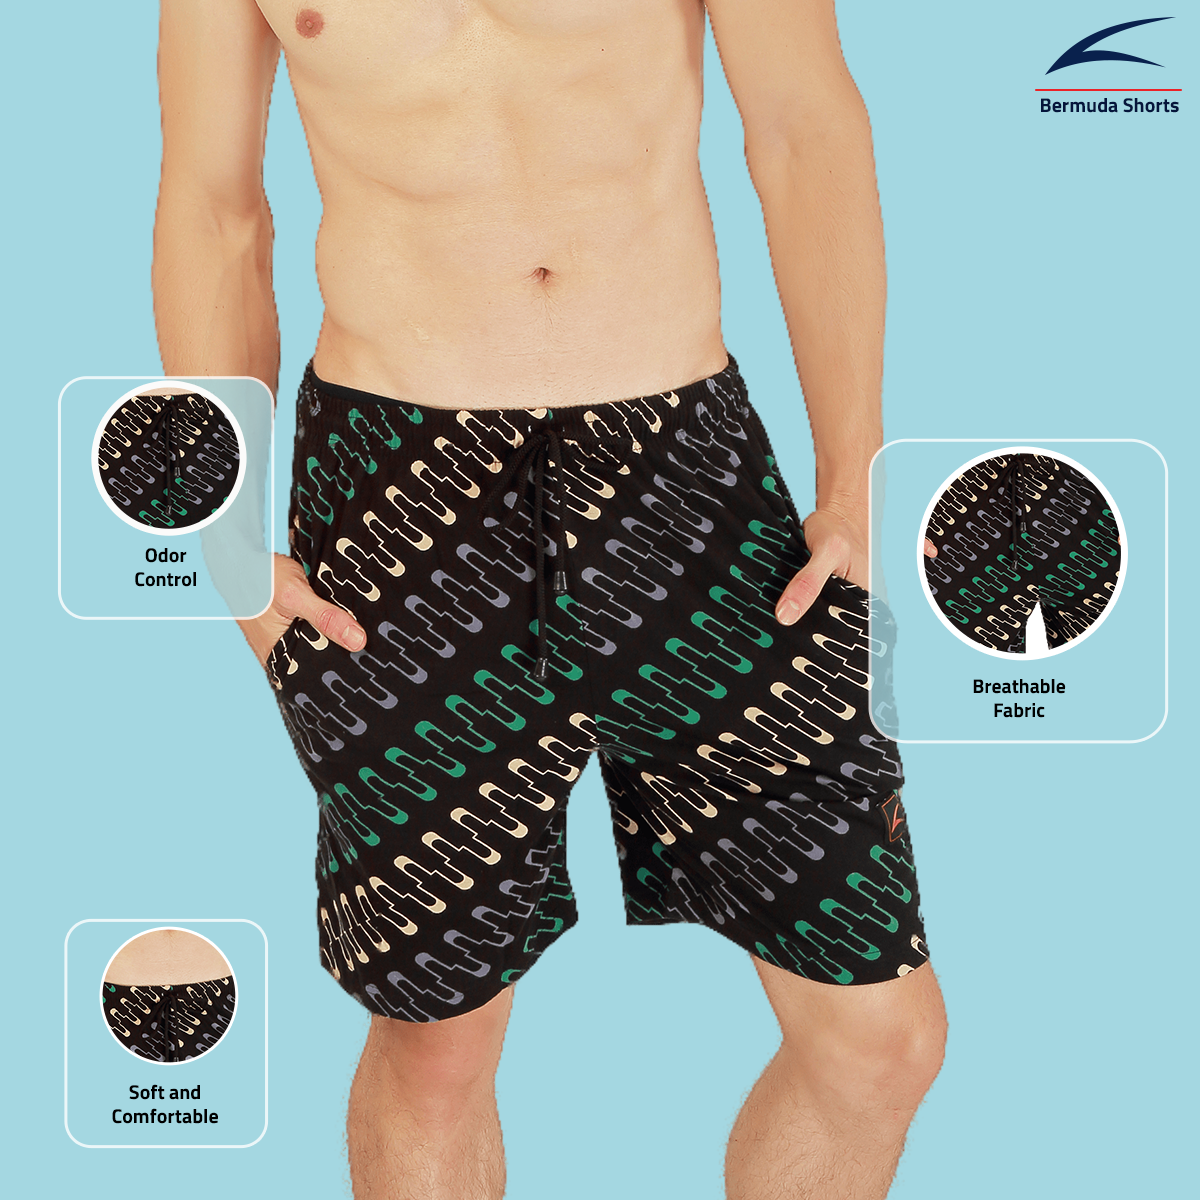 Men's Bermuda Shorts - Casual Comfort for Every Occasion